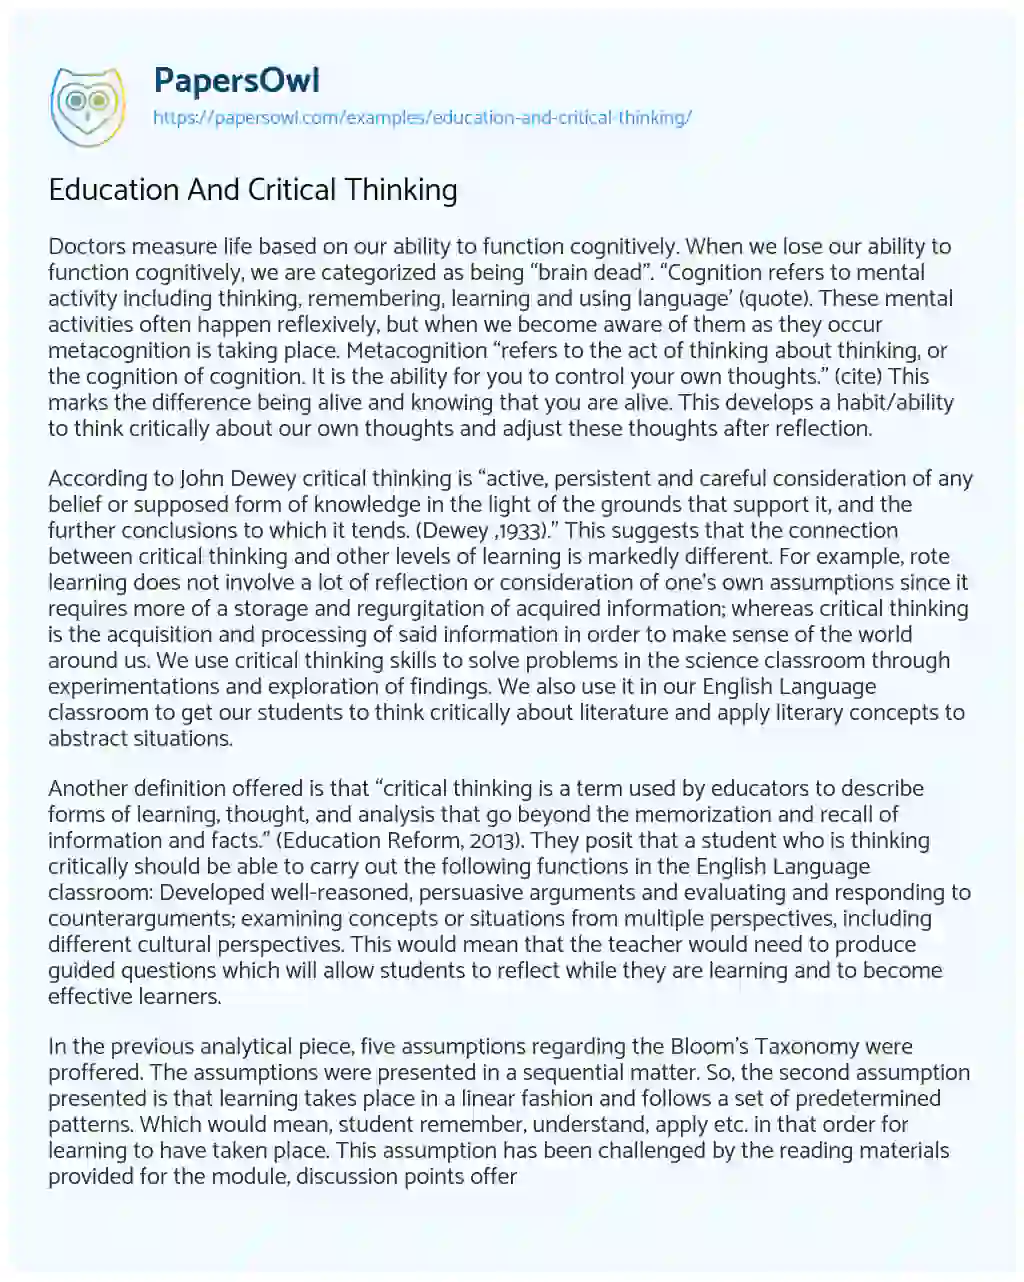 Education and Critical Thinking essay